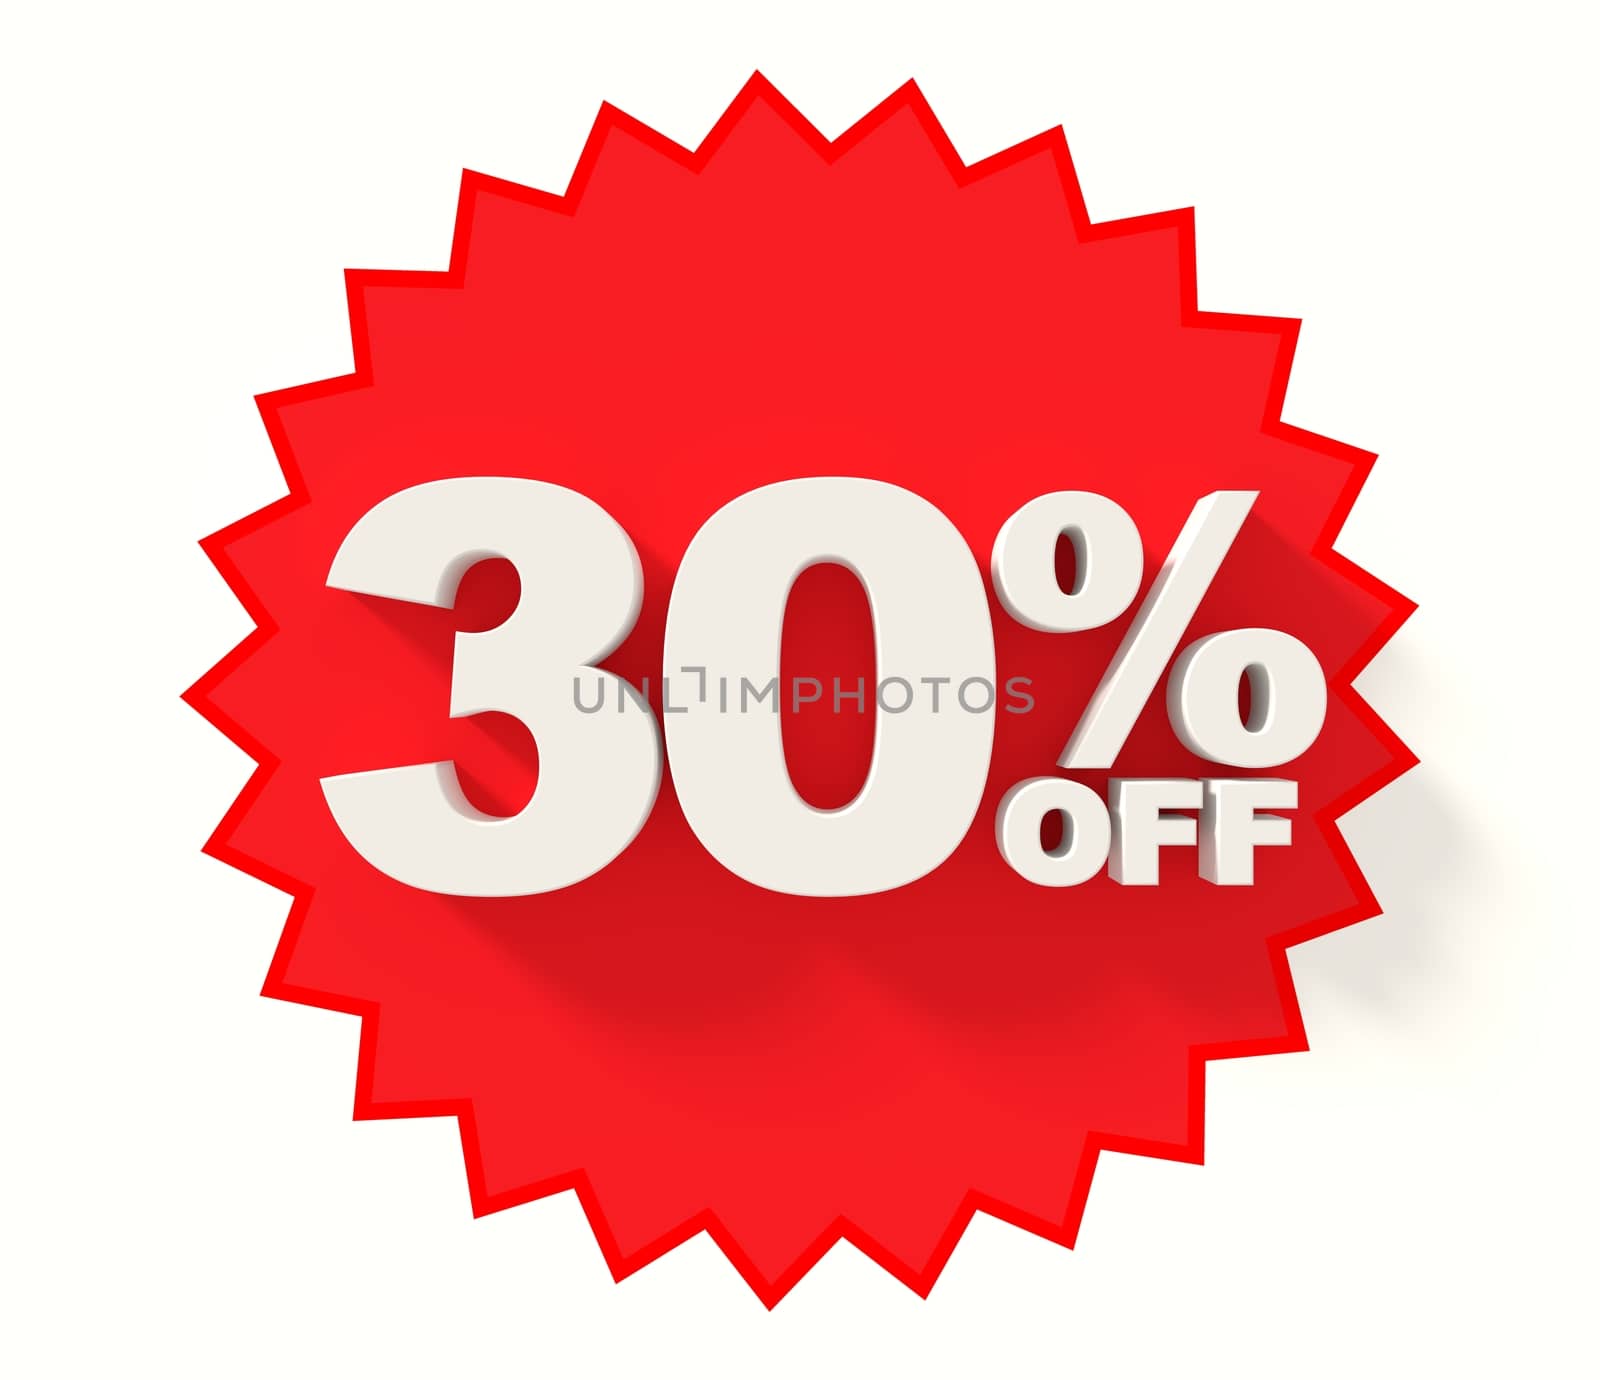 Sale sign, white letters on red star background